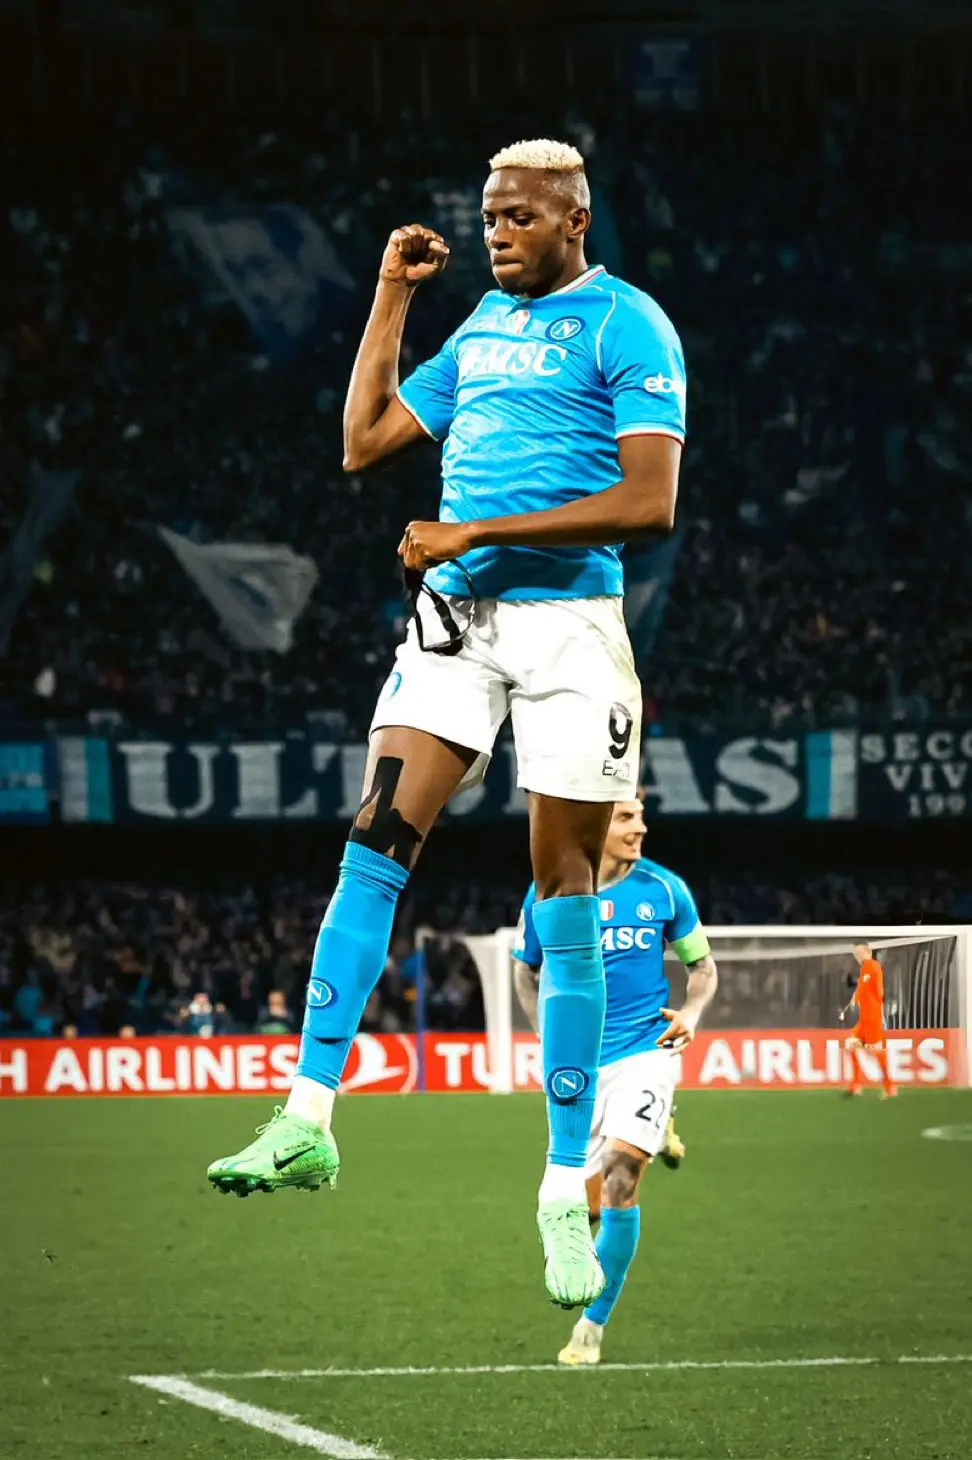 Serie A: Osimhen on target in Napoli's draw against Frosinone